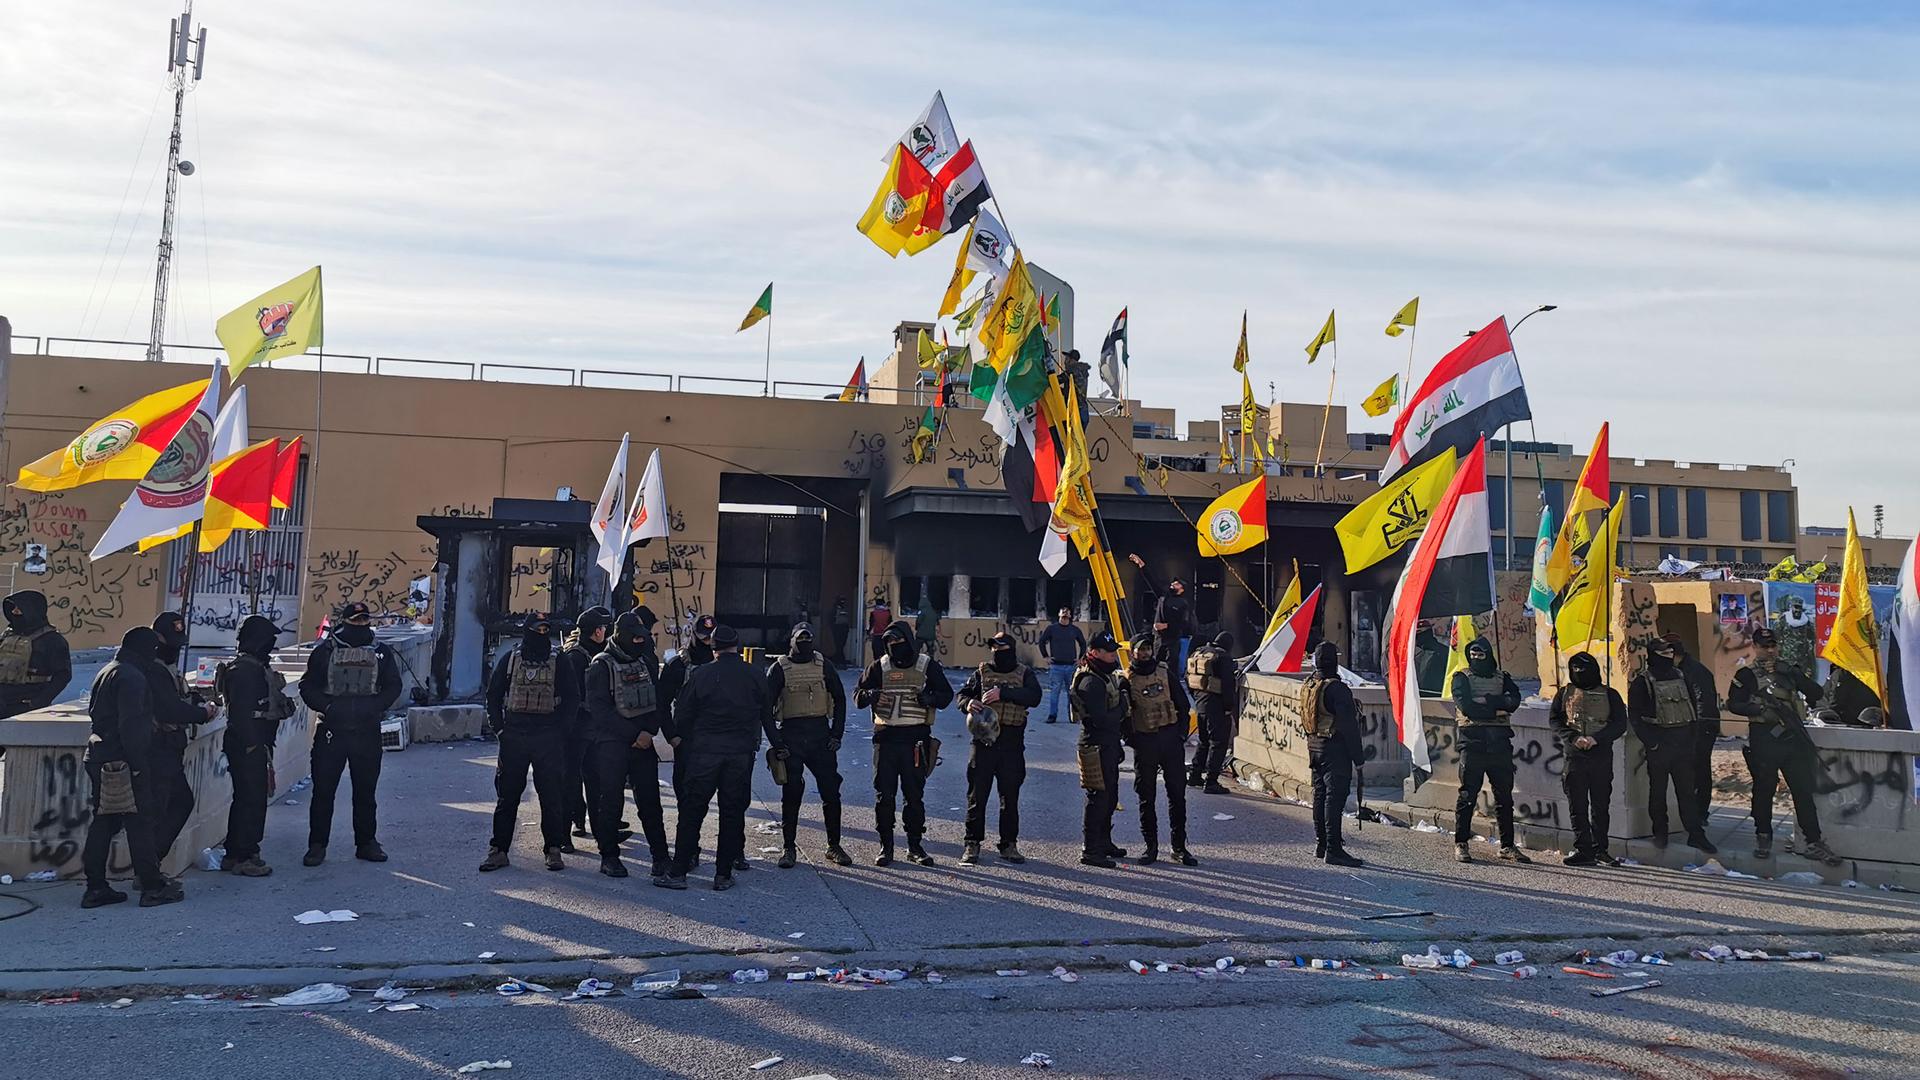 A line of security forces wearing helmets and carrying weapons are shown standing outside of the US Embassy in Baghdad.